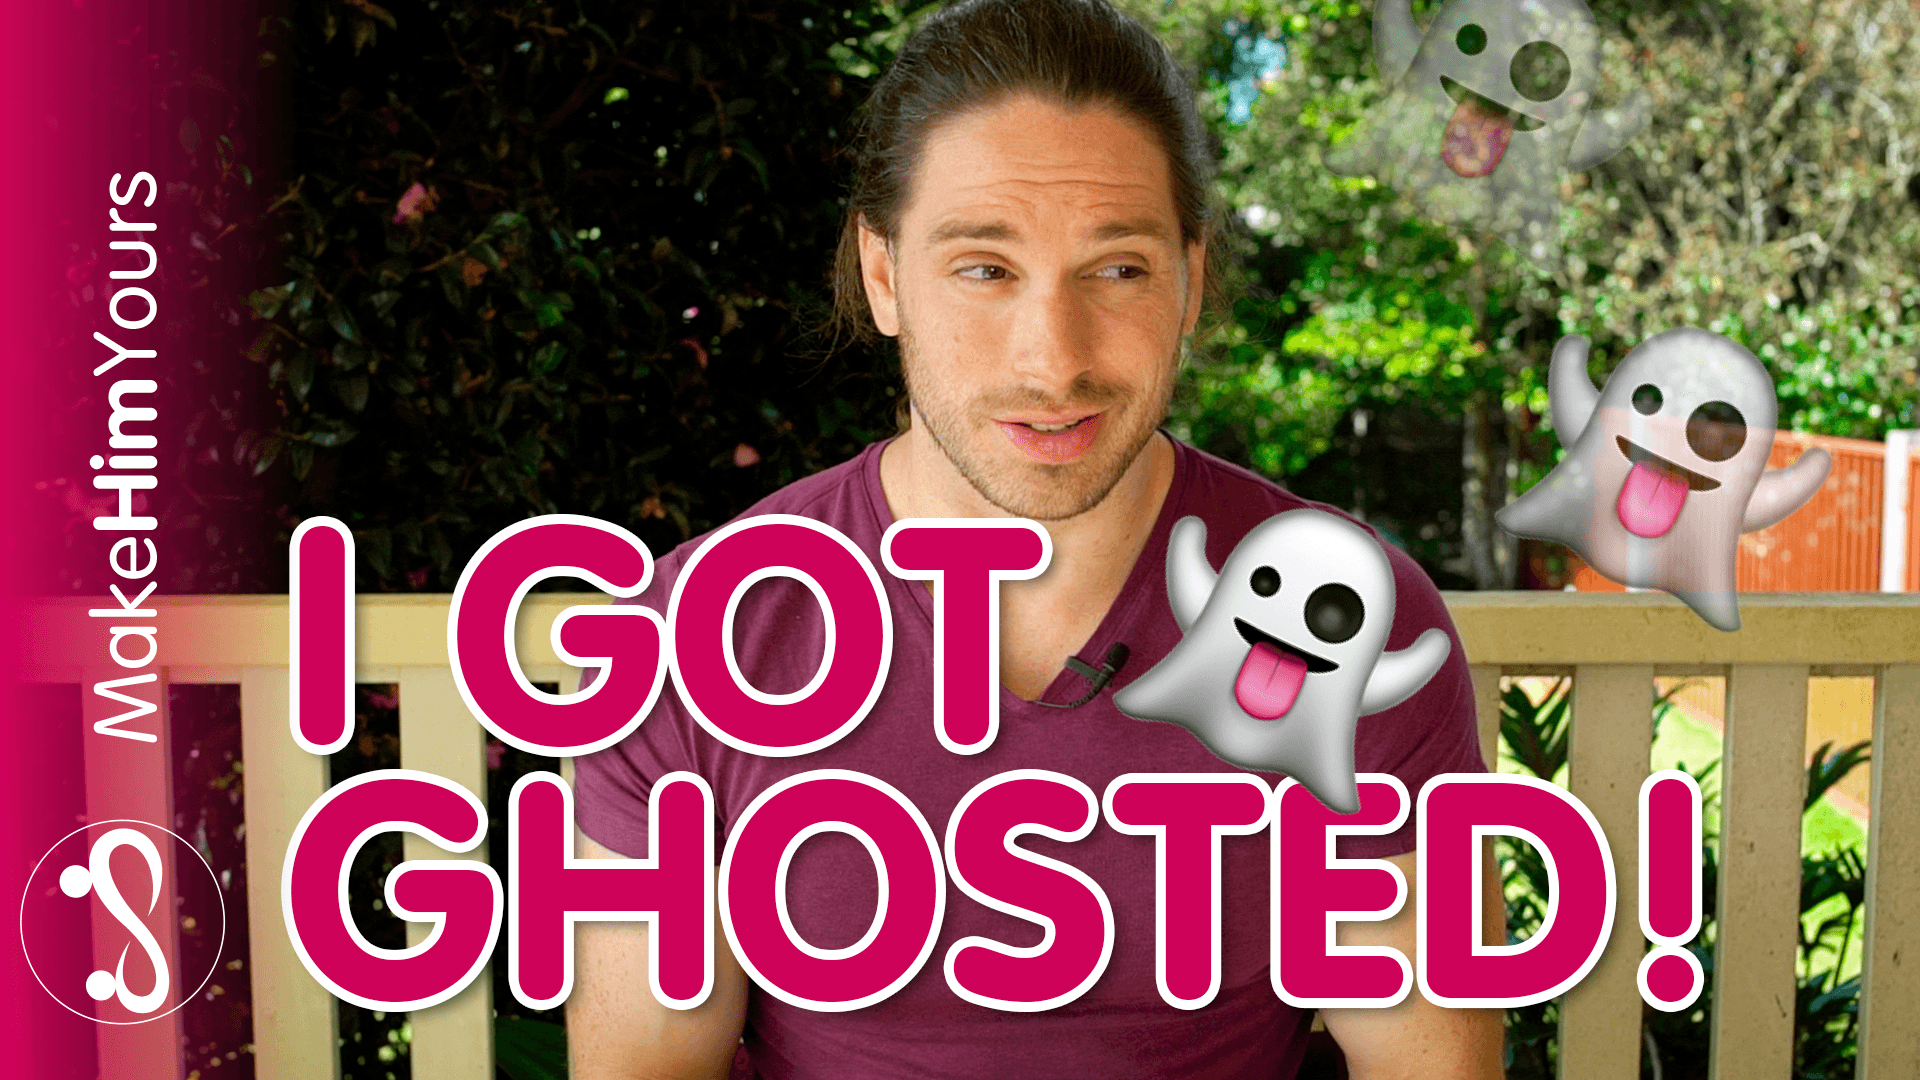 When A Dating Coach Gets Ghosted!